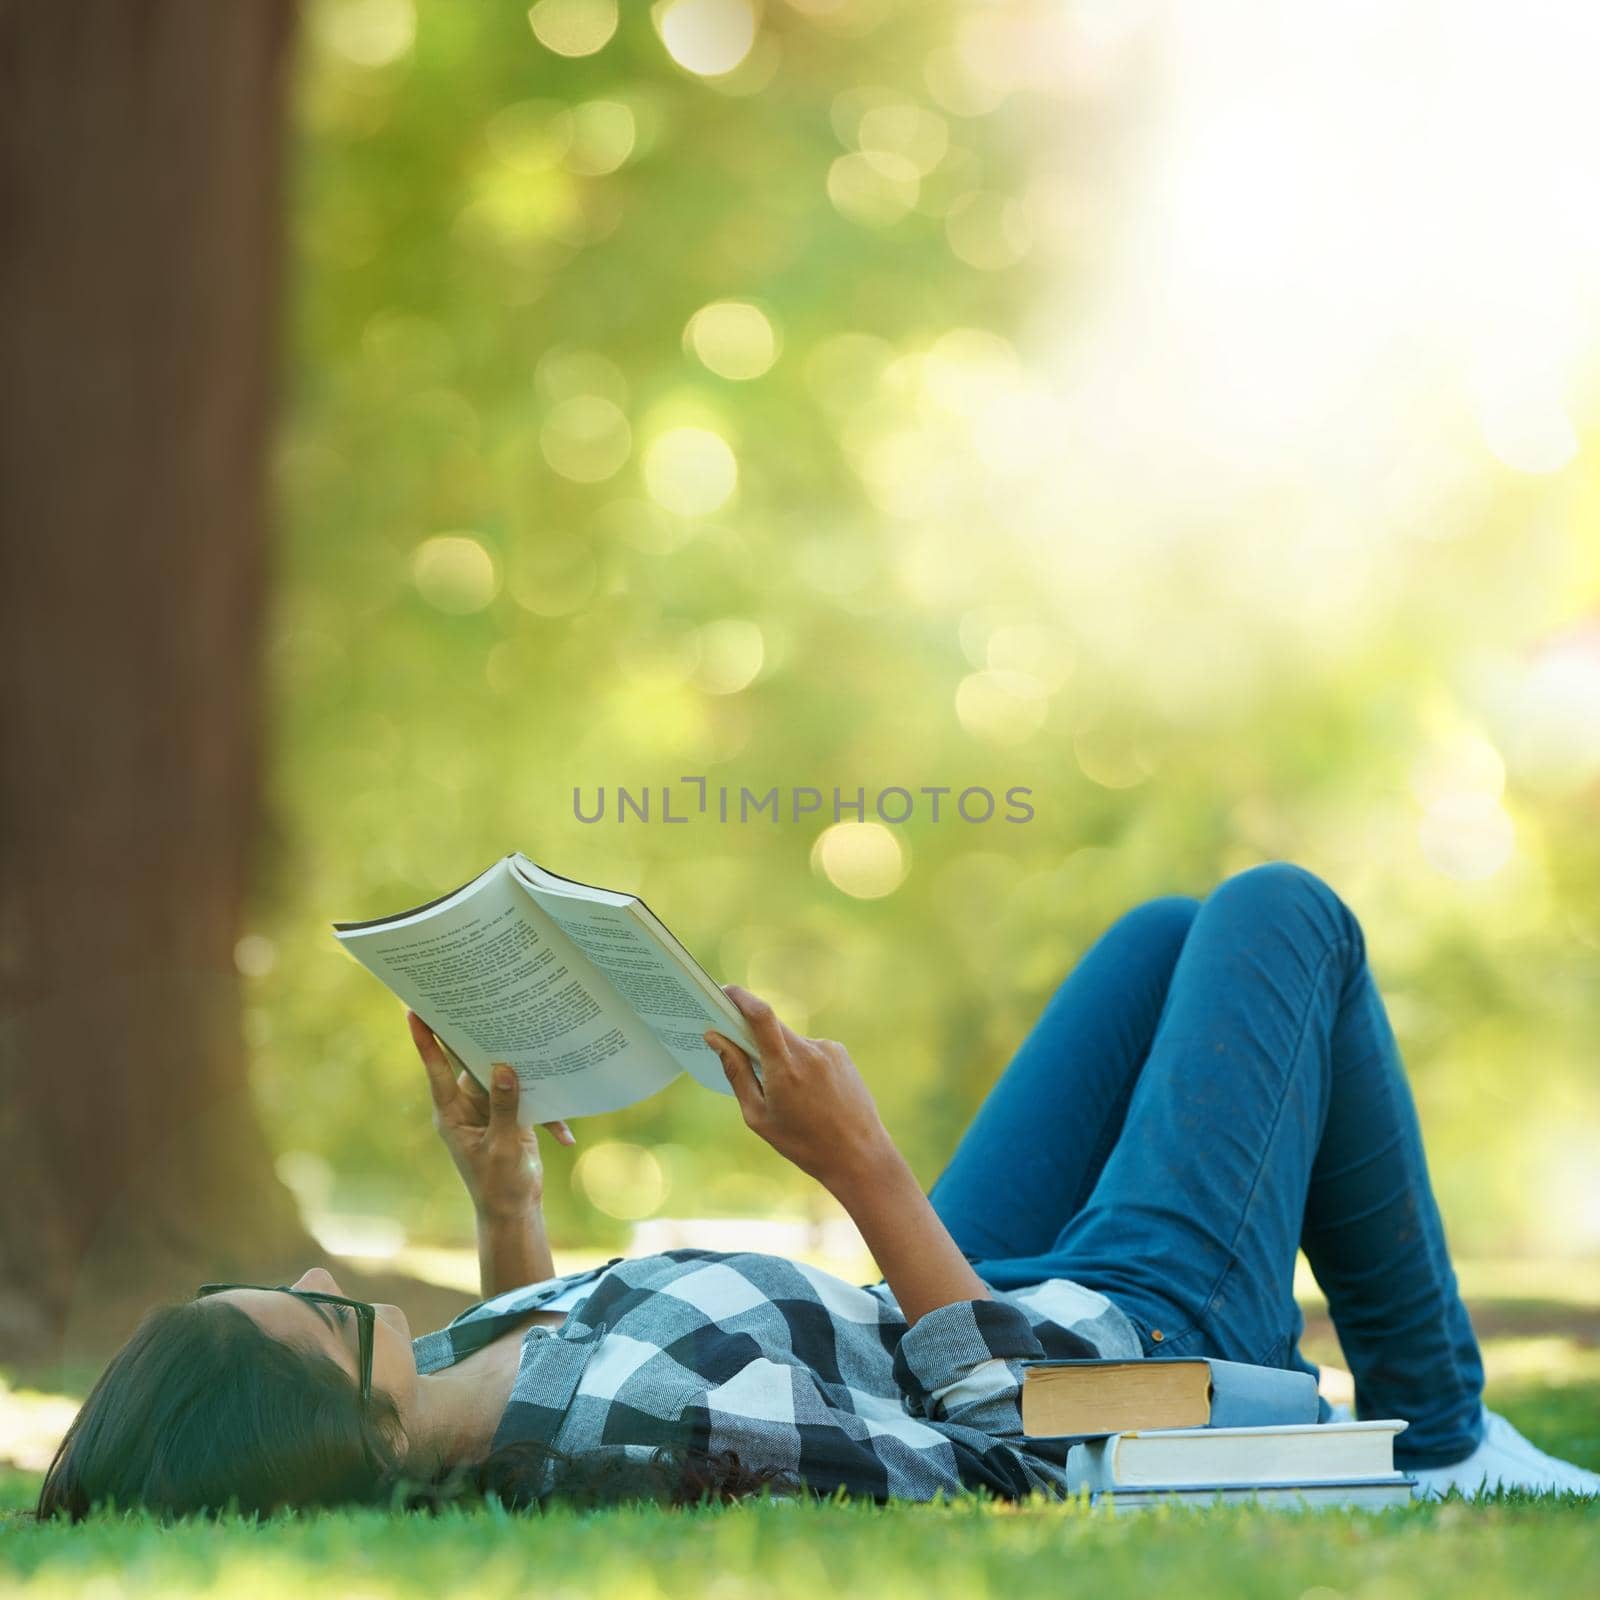 Shot of a young woman lying on grass and reading a book.